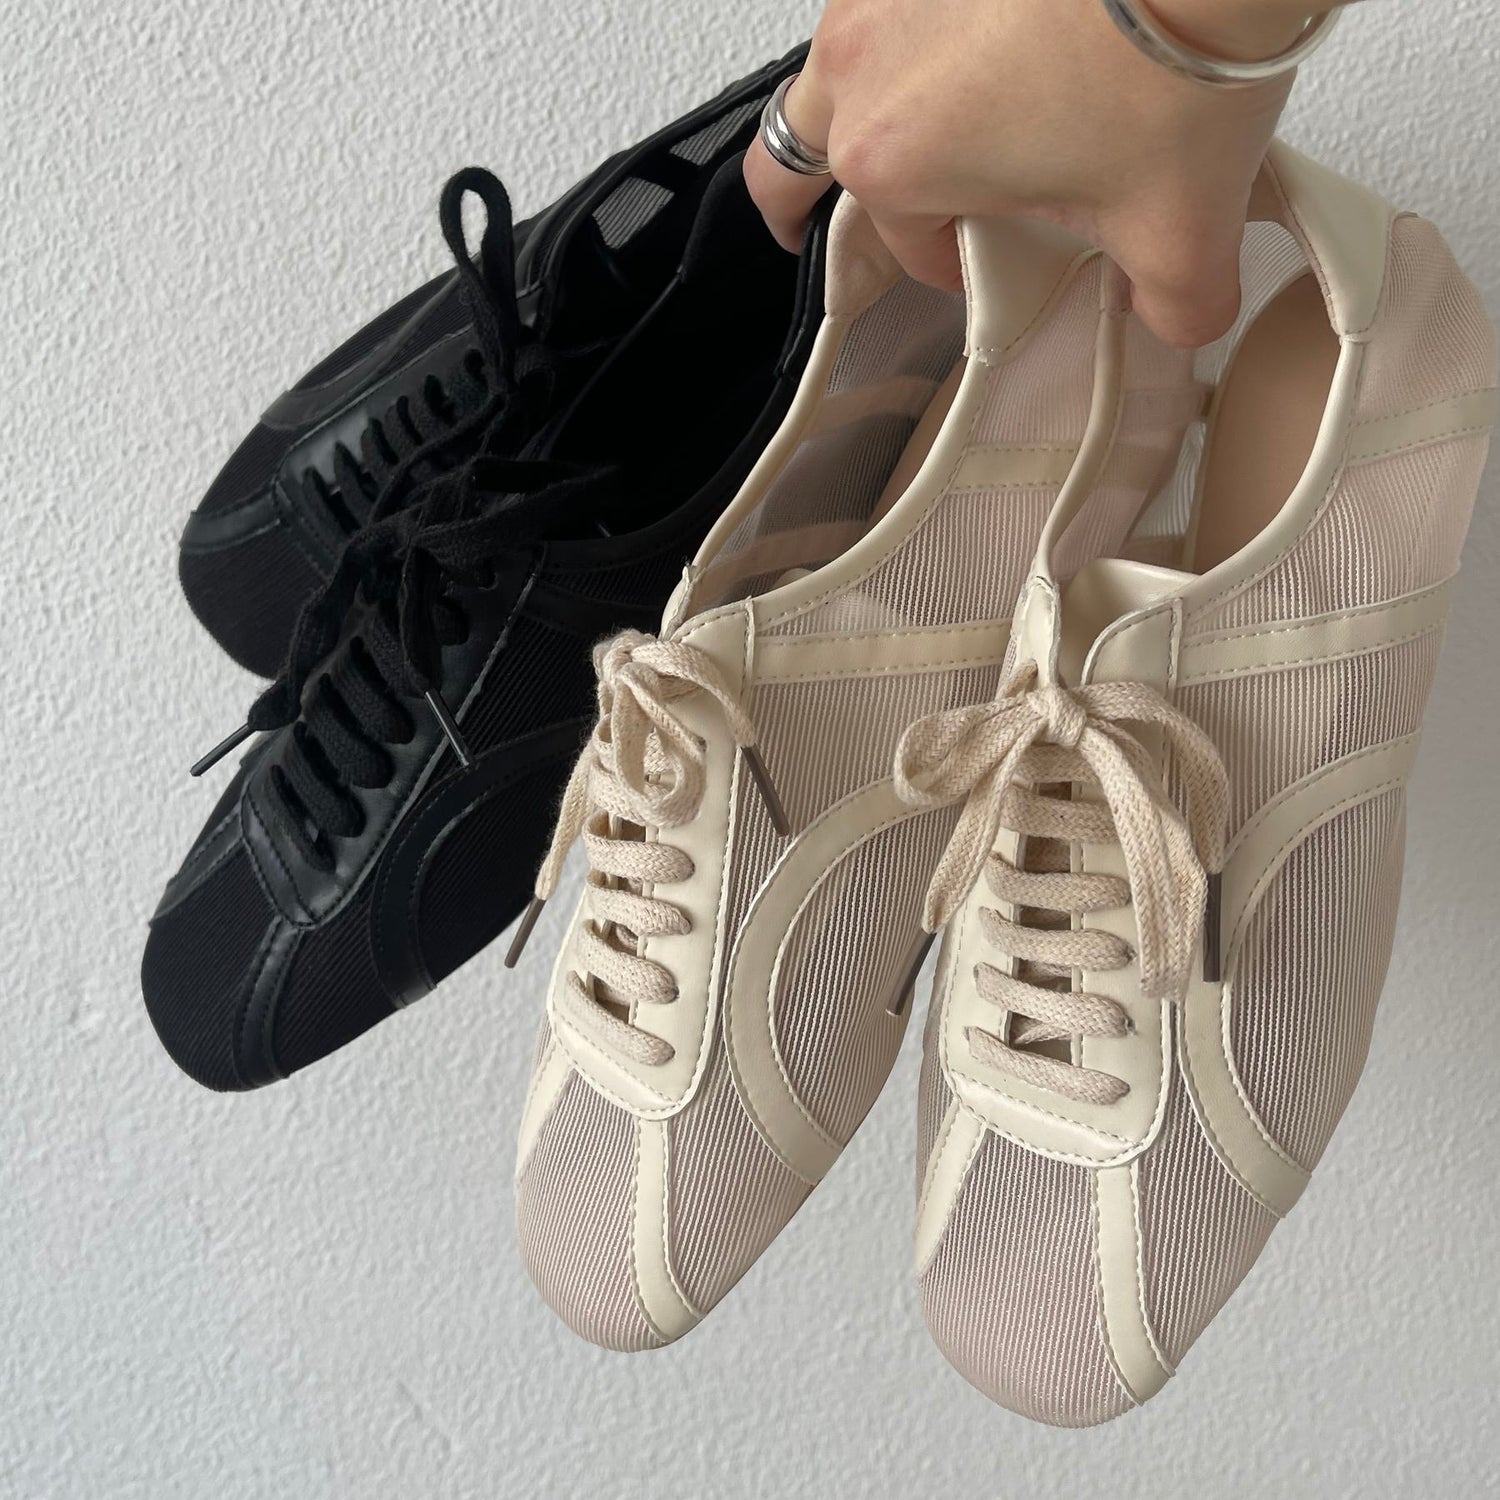 see through mesh shoes / beige